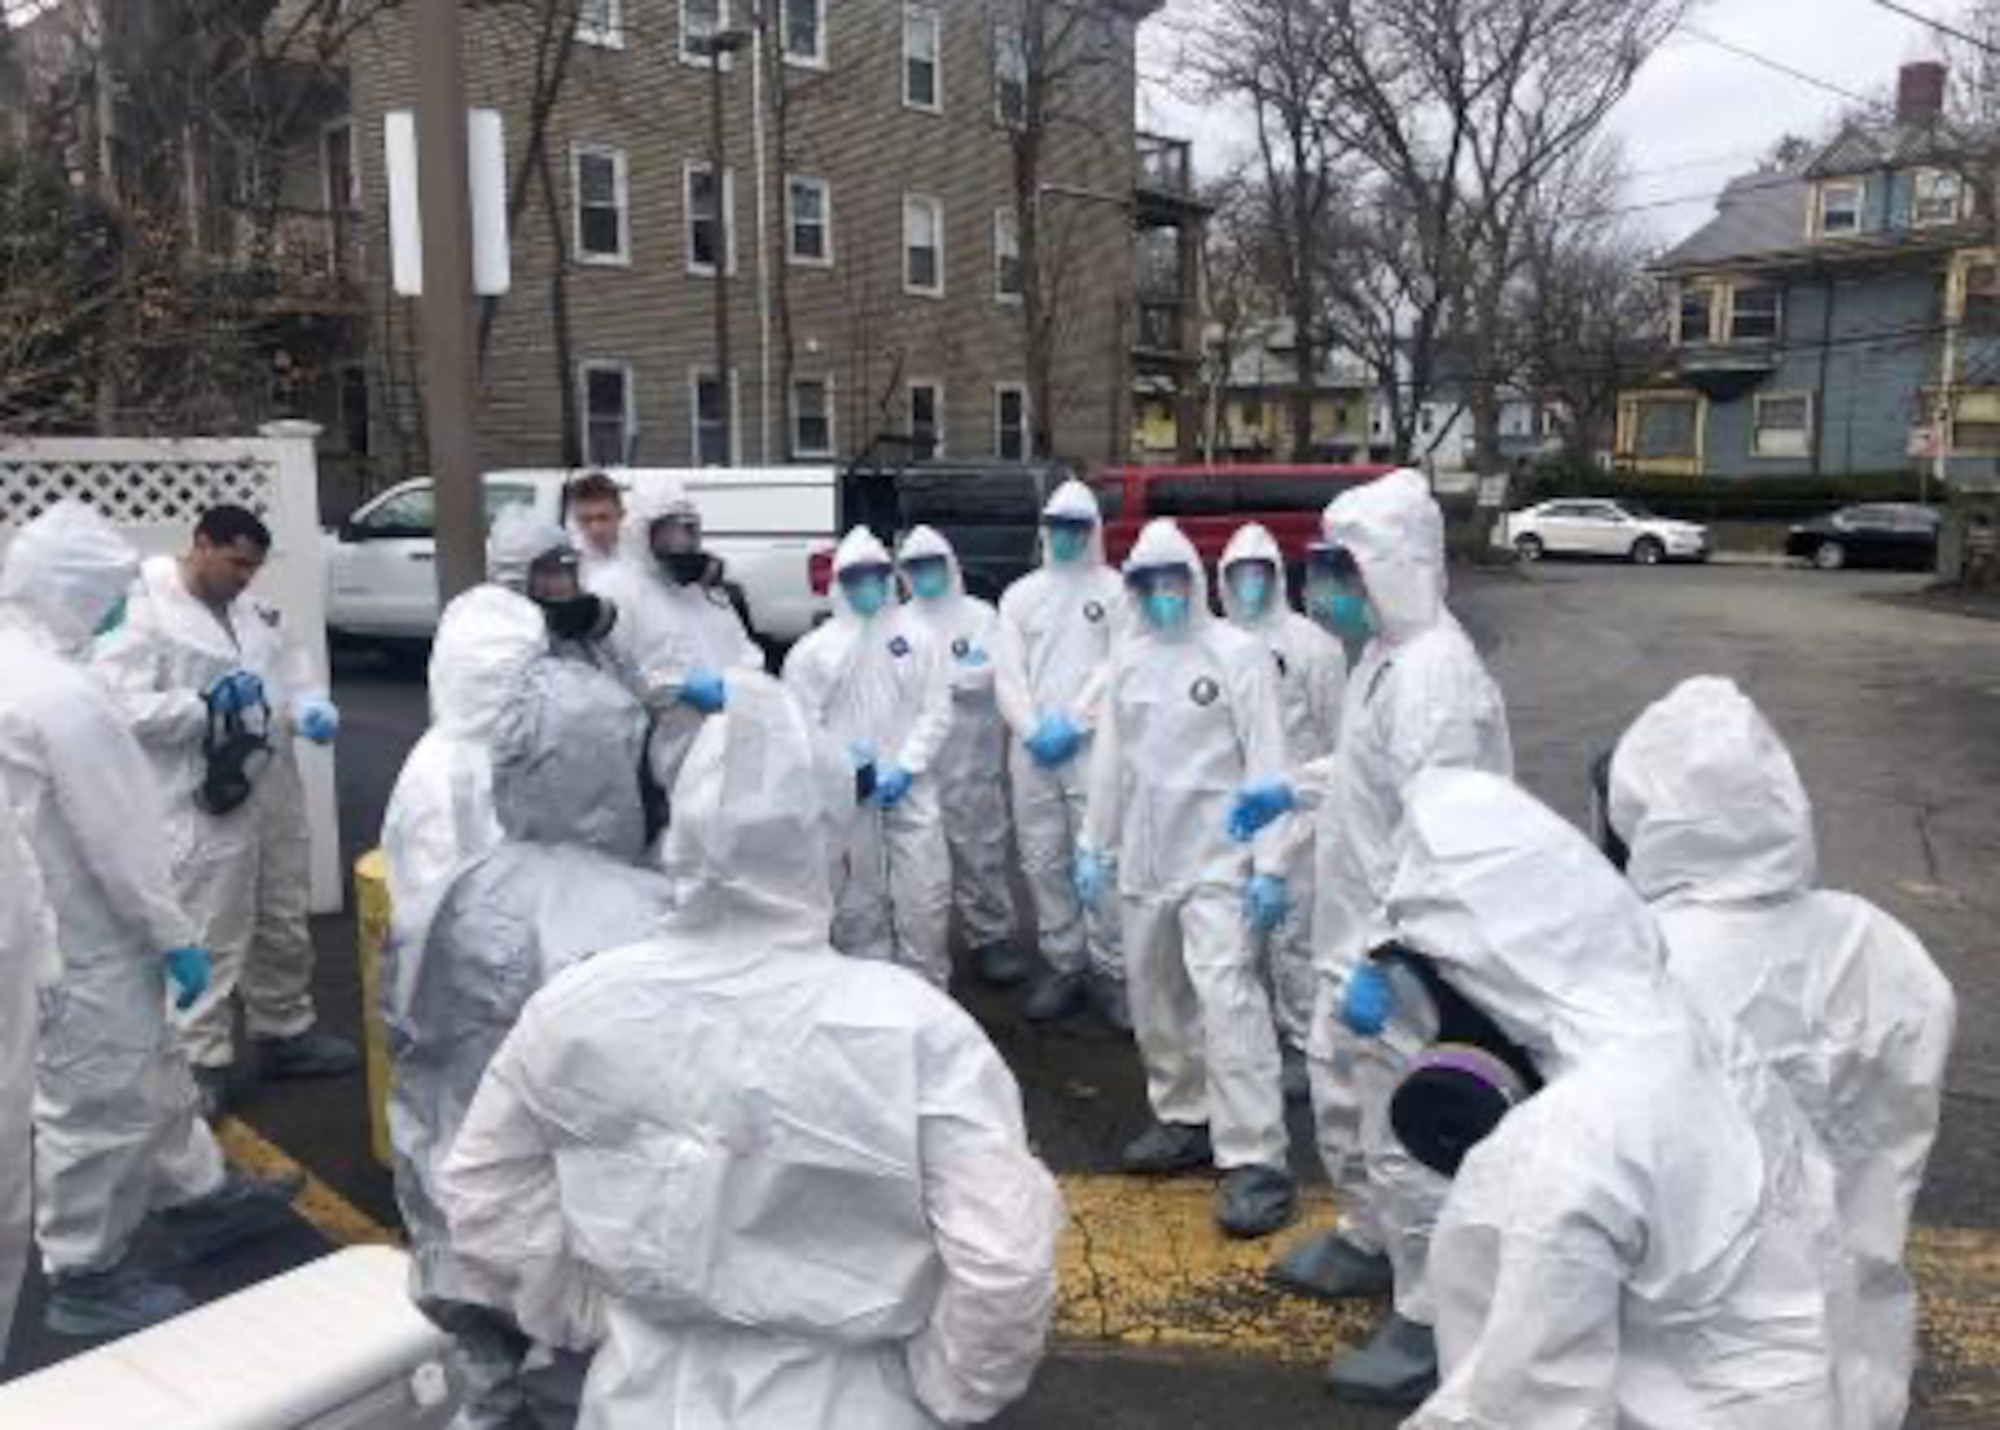 A group of aerospace medical technicians and a medical administrator from the 104th Medical Group spent the last week moving throughout Massachusetts administering tests for COVID-19, sometimes at four locations per day. (Courtesy Photo)